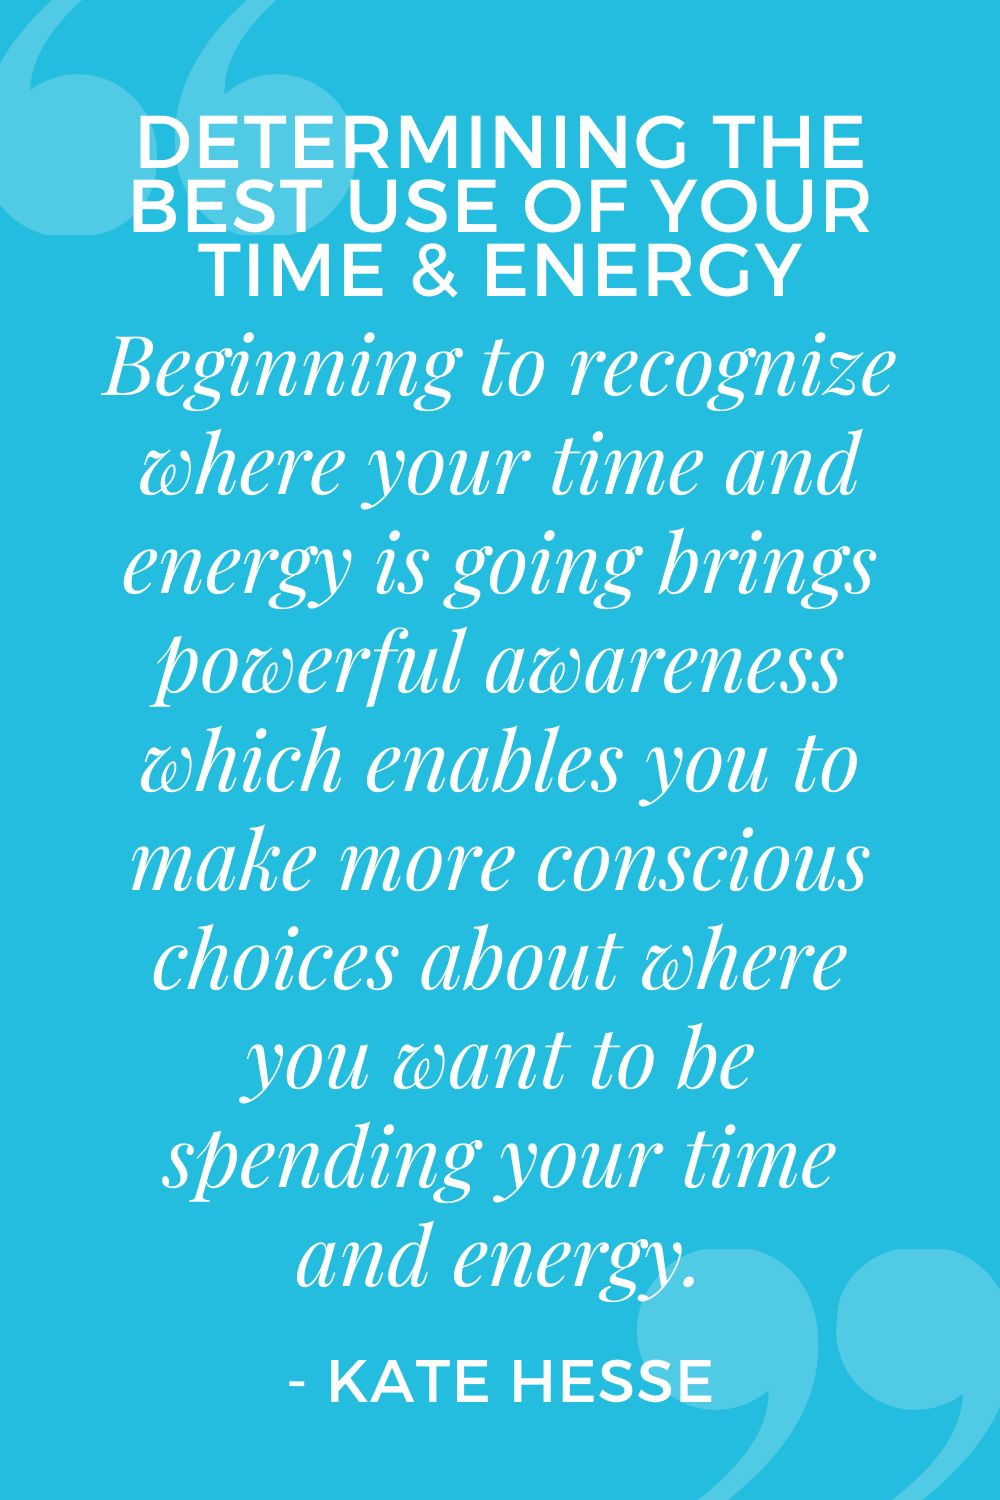 Beginning to recognize where your time and energy is going brings powerful awareness which enables you to make more conscious choices about where you want to be spending your time and energy.